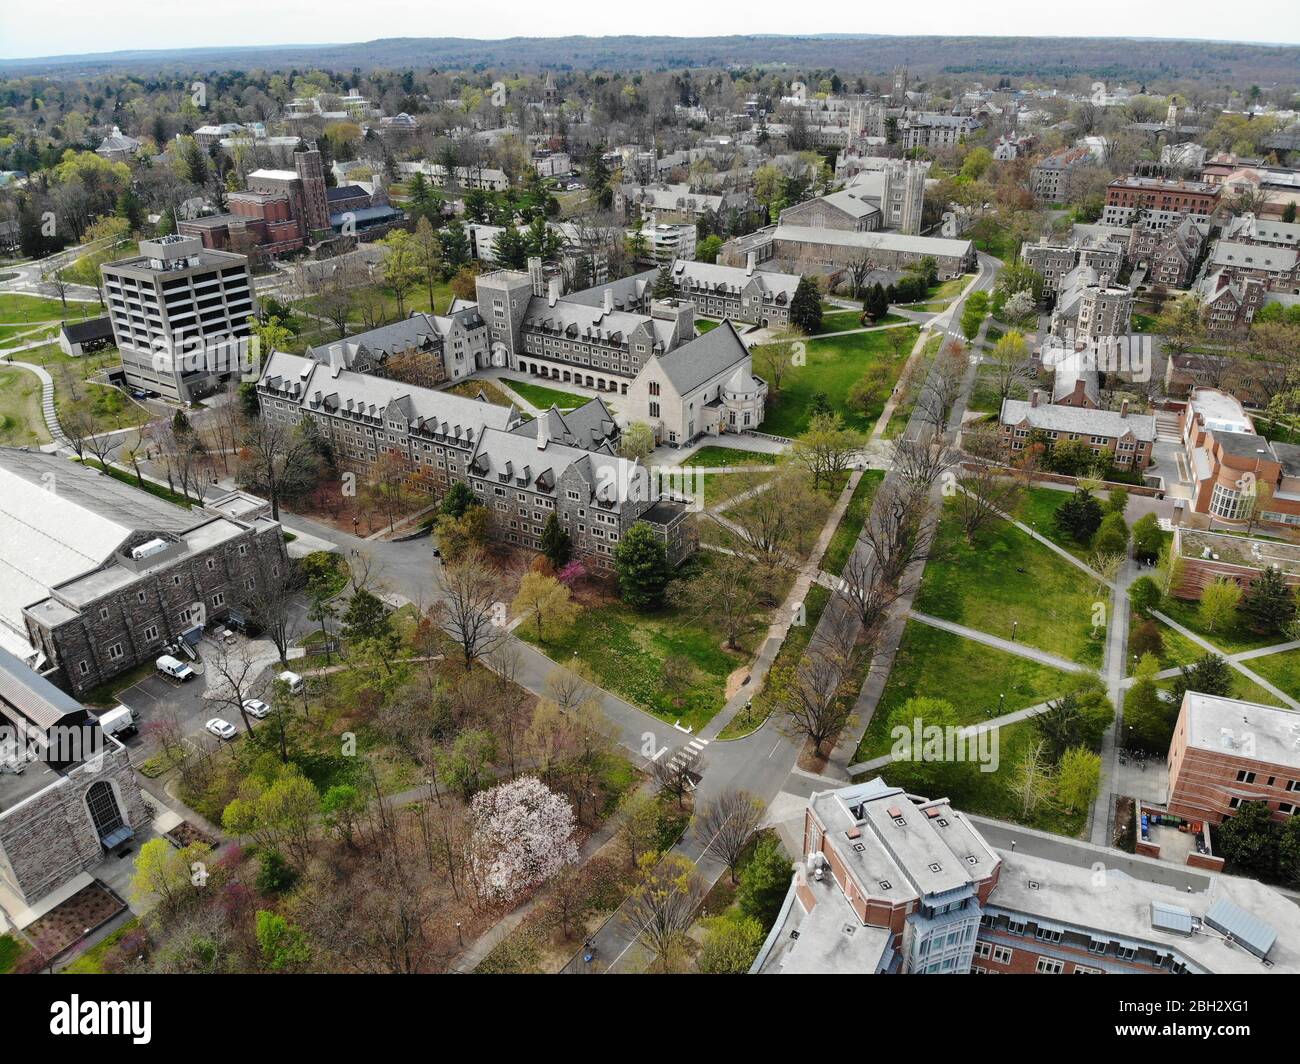 Princeton Nj 12 Apr 2020 Aerial View Of The Town Of Princeton New Jersey Home Of The Campus Of Ivy League Princeton University Nj Usa 2BH2XG1 